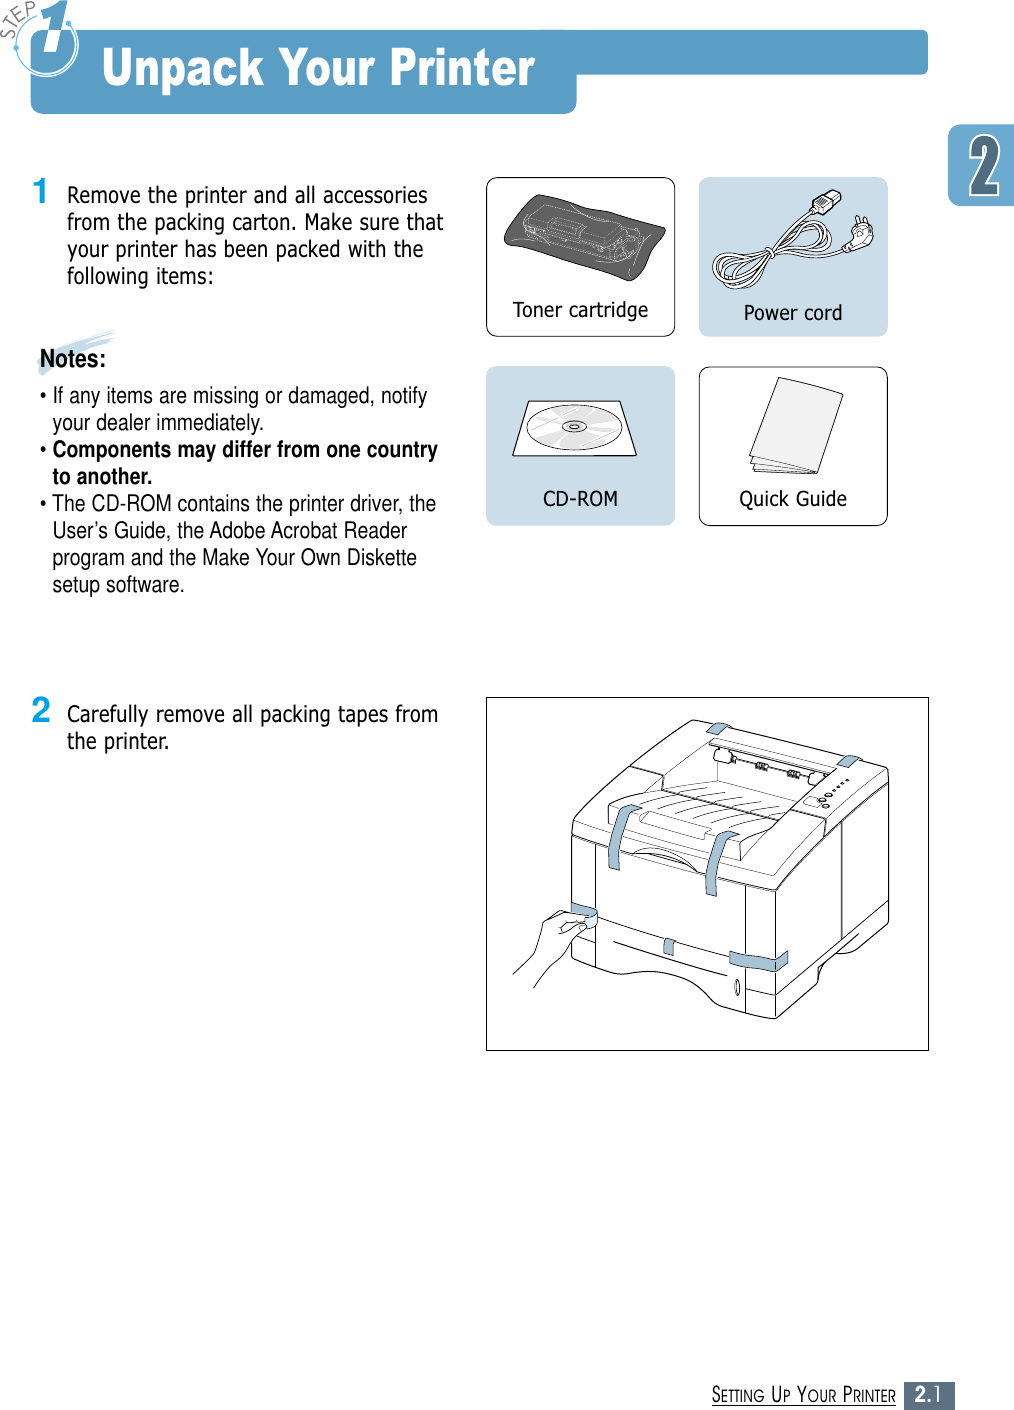 2.1SETTING UP YOUR PRINTERUnpack Your Printer1Remove the printer and all accessoriesfrom the packing carton. Make sure thatyour printer has been packed with thefollowing items:Notes: • If any items are missing or damaged, notifyyour dealer immediately.• Components may differ from one countryto another.• The CD-ROM contains the printer driver, theUser’s Guide, the Adobe Acrobat Readerprogram and the Make Your Own Diskettesetup software.Toner cartridge Power cordQuick GuideCD-ROM2Carefully remove all packing tapes fromthe printer. 